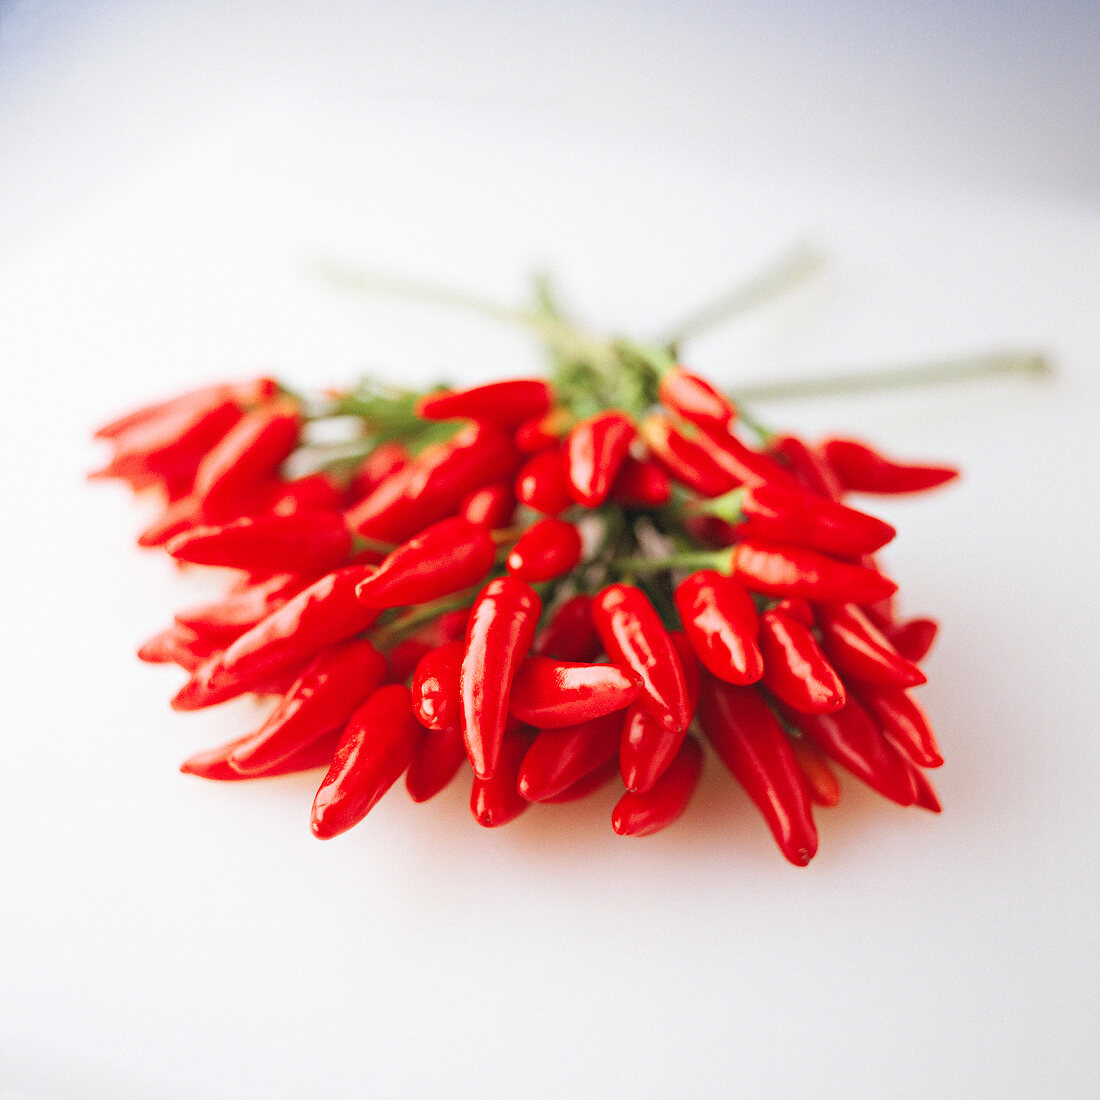 Red Chilli peppers